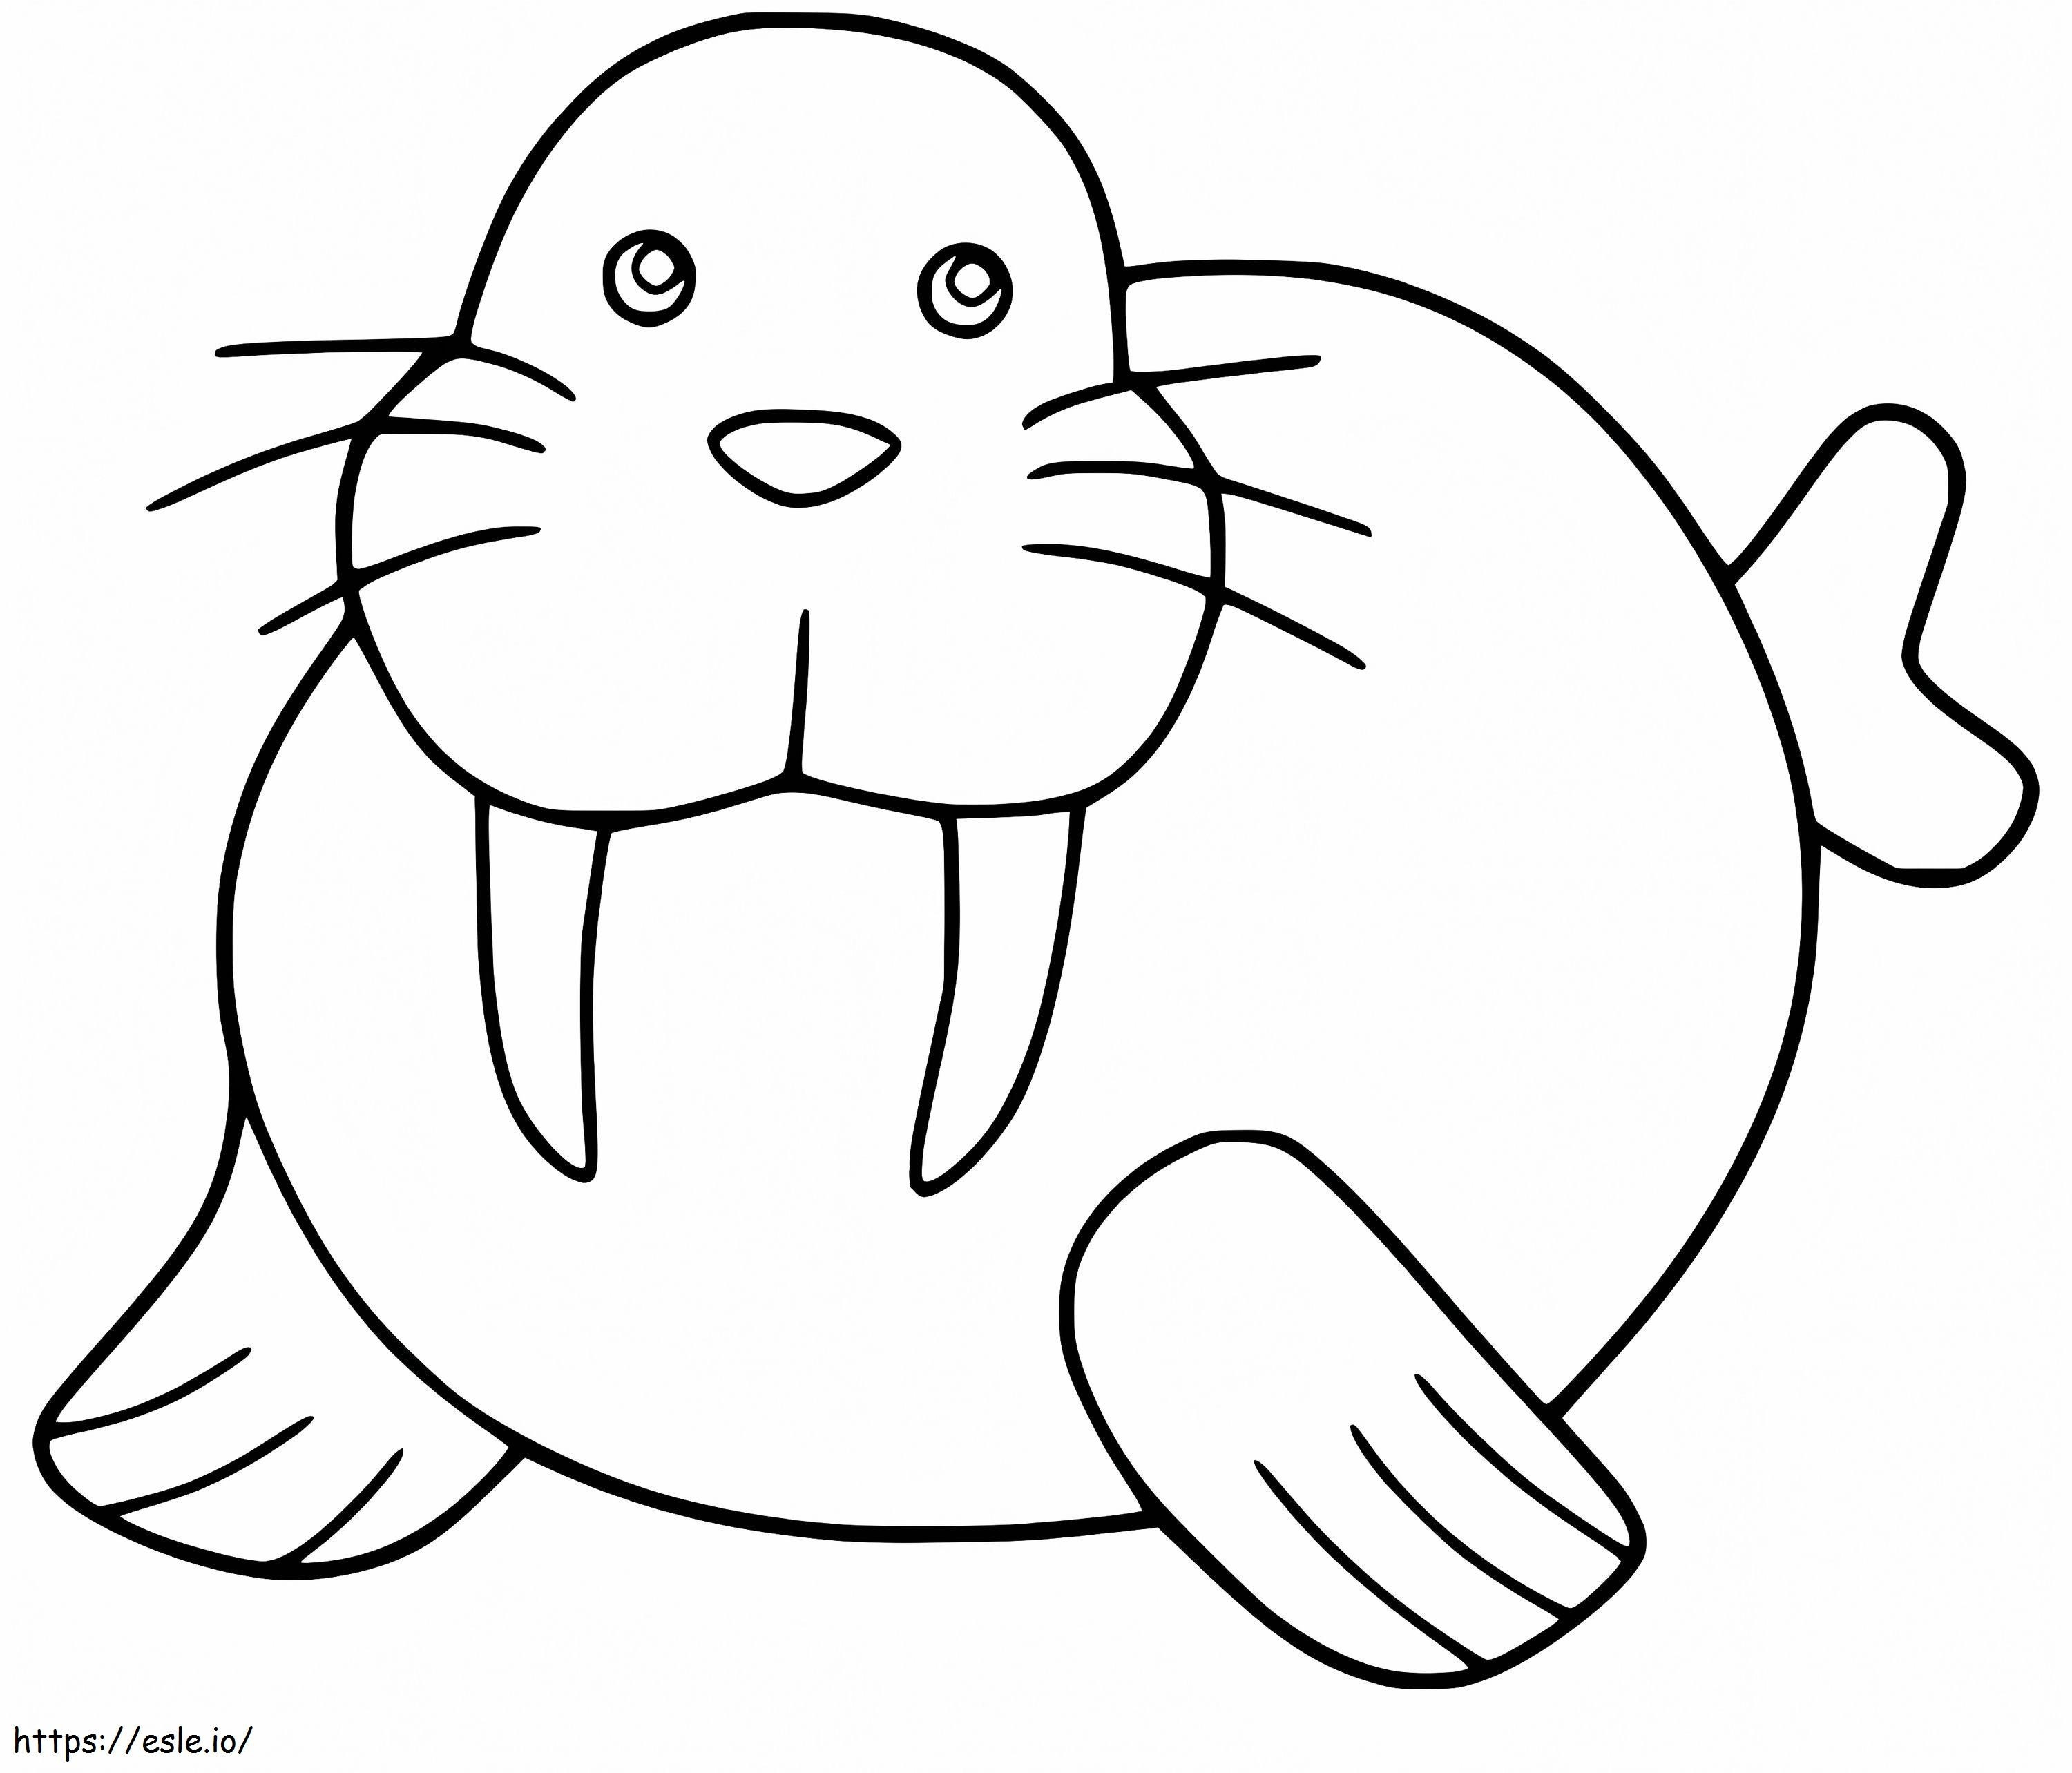 Walrus 6 coloring page